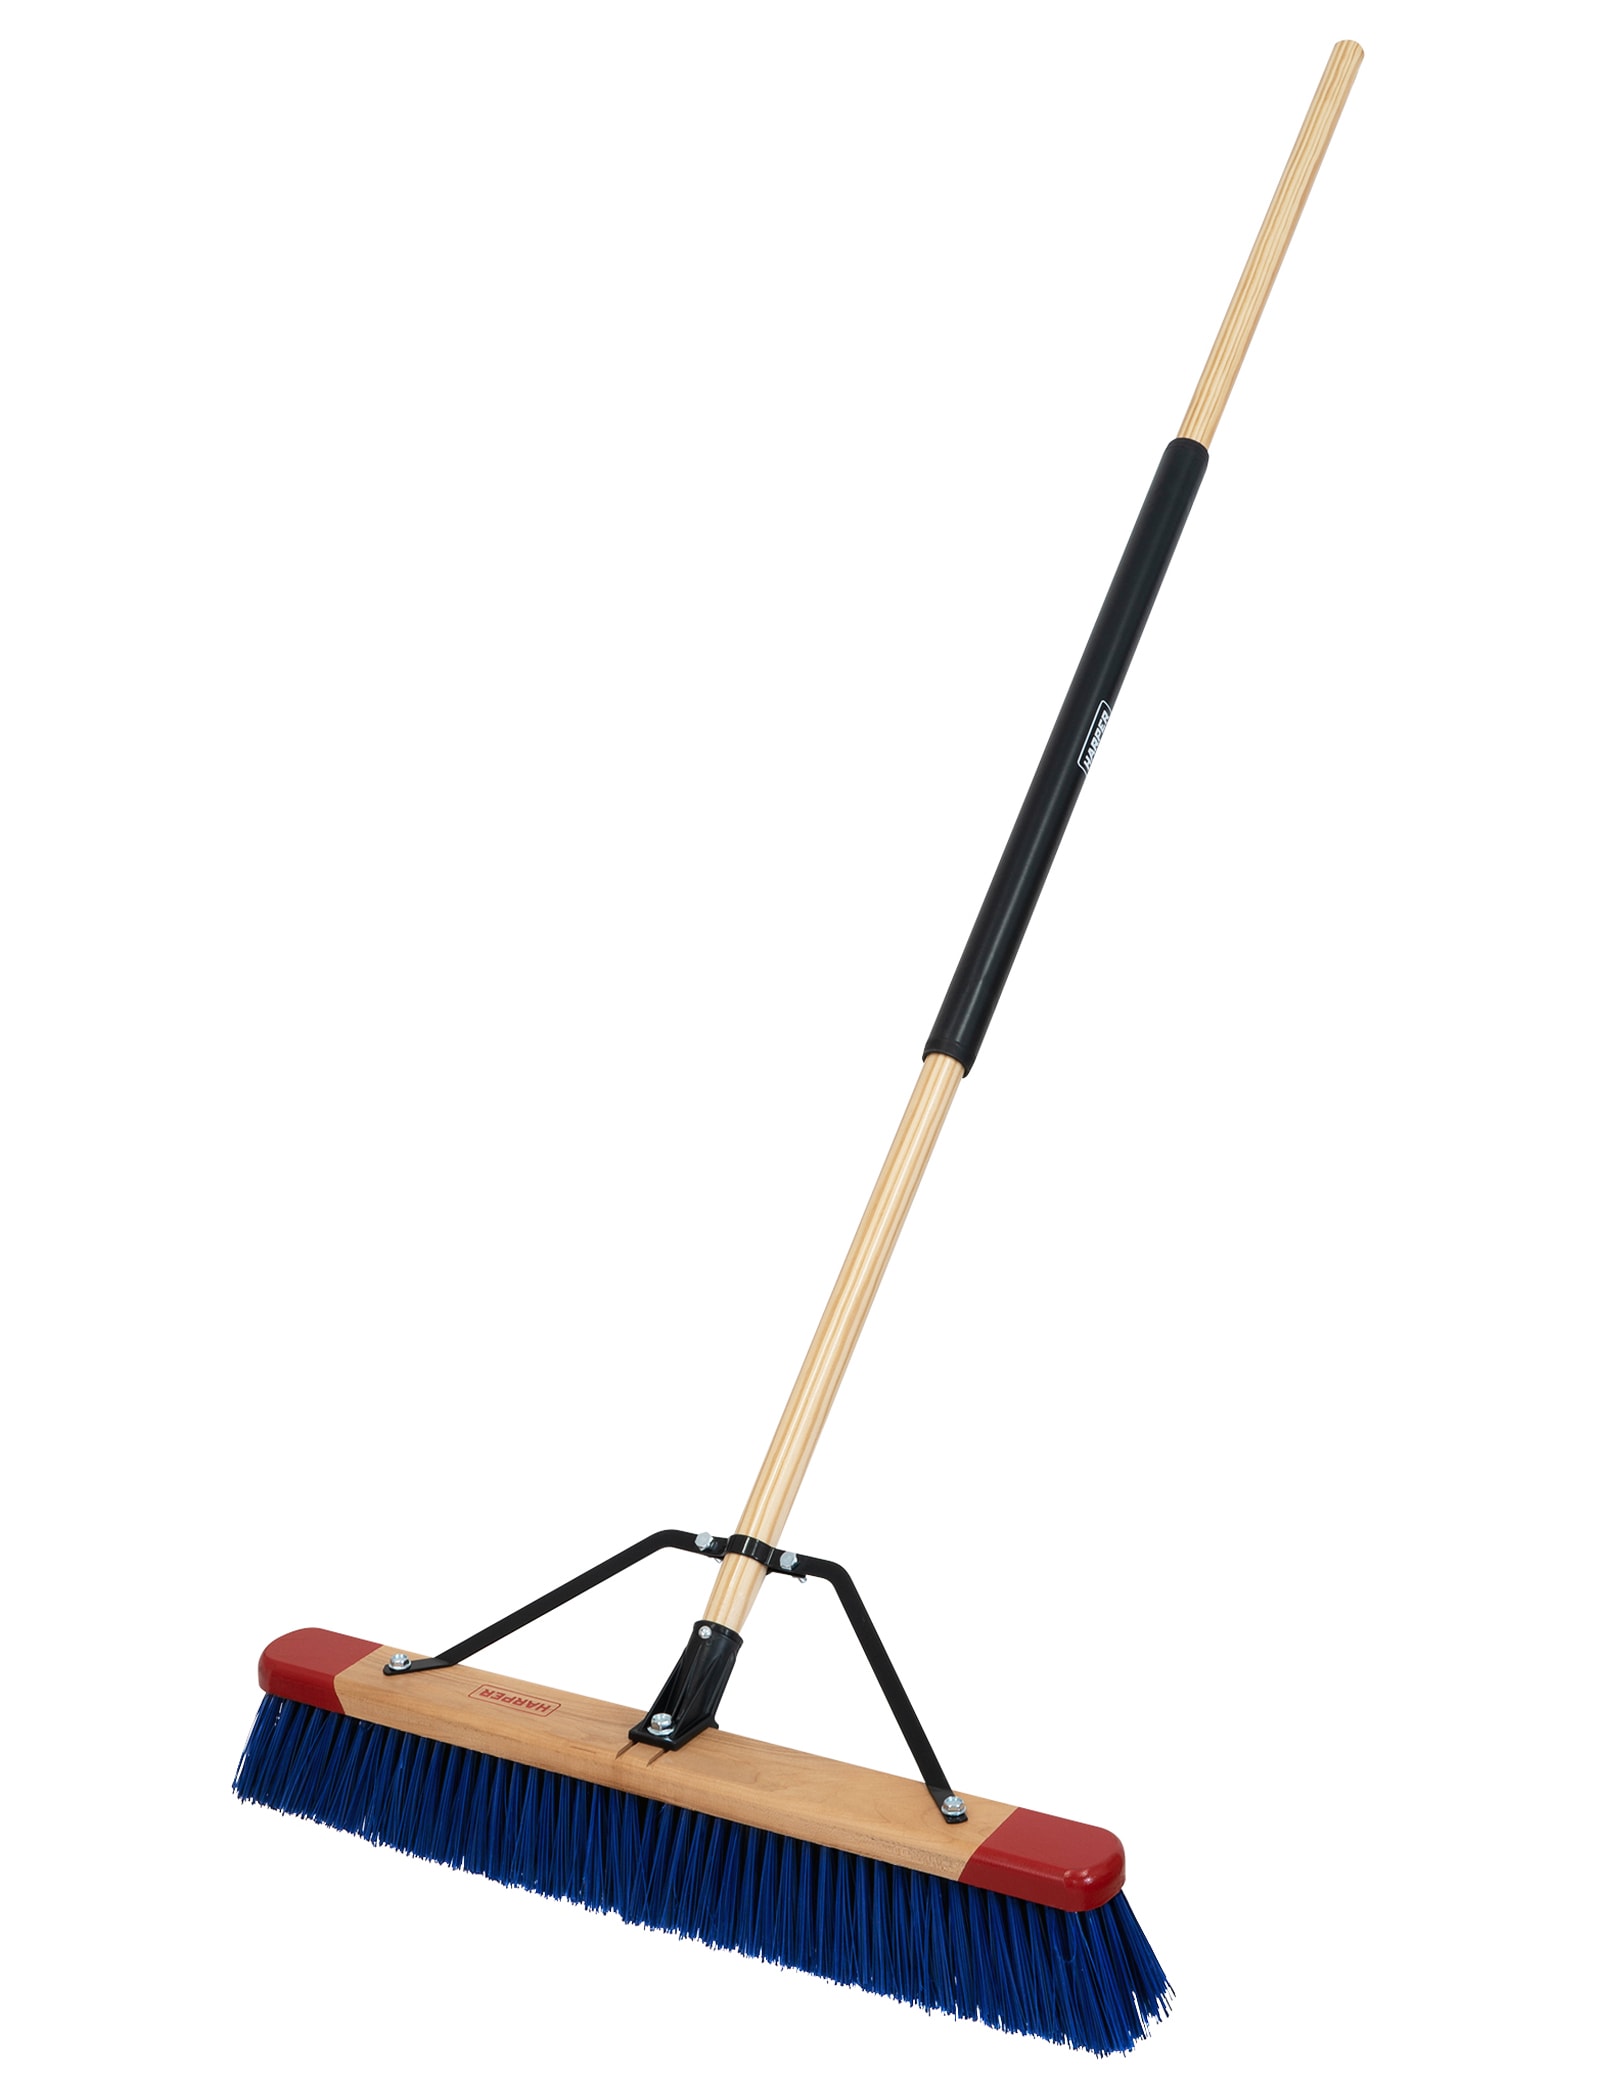 24 in. Smooth Surface Push Broom Head with 60 in. Wood Handle Combo